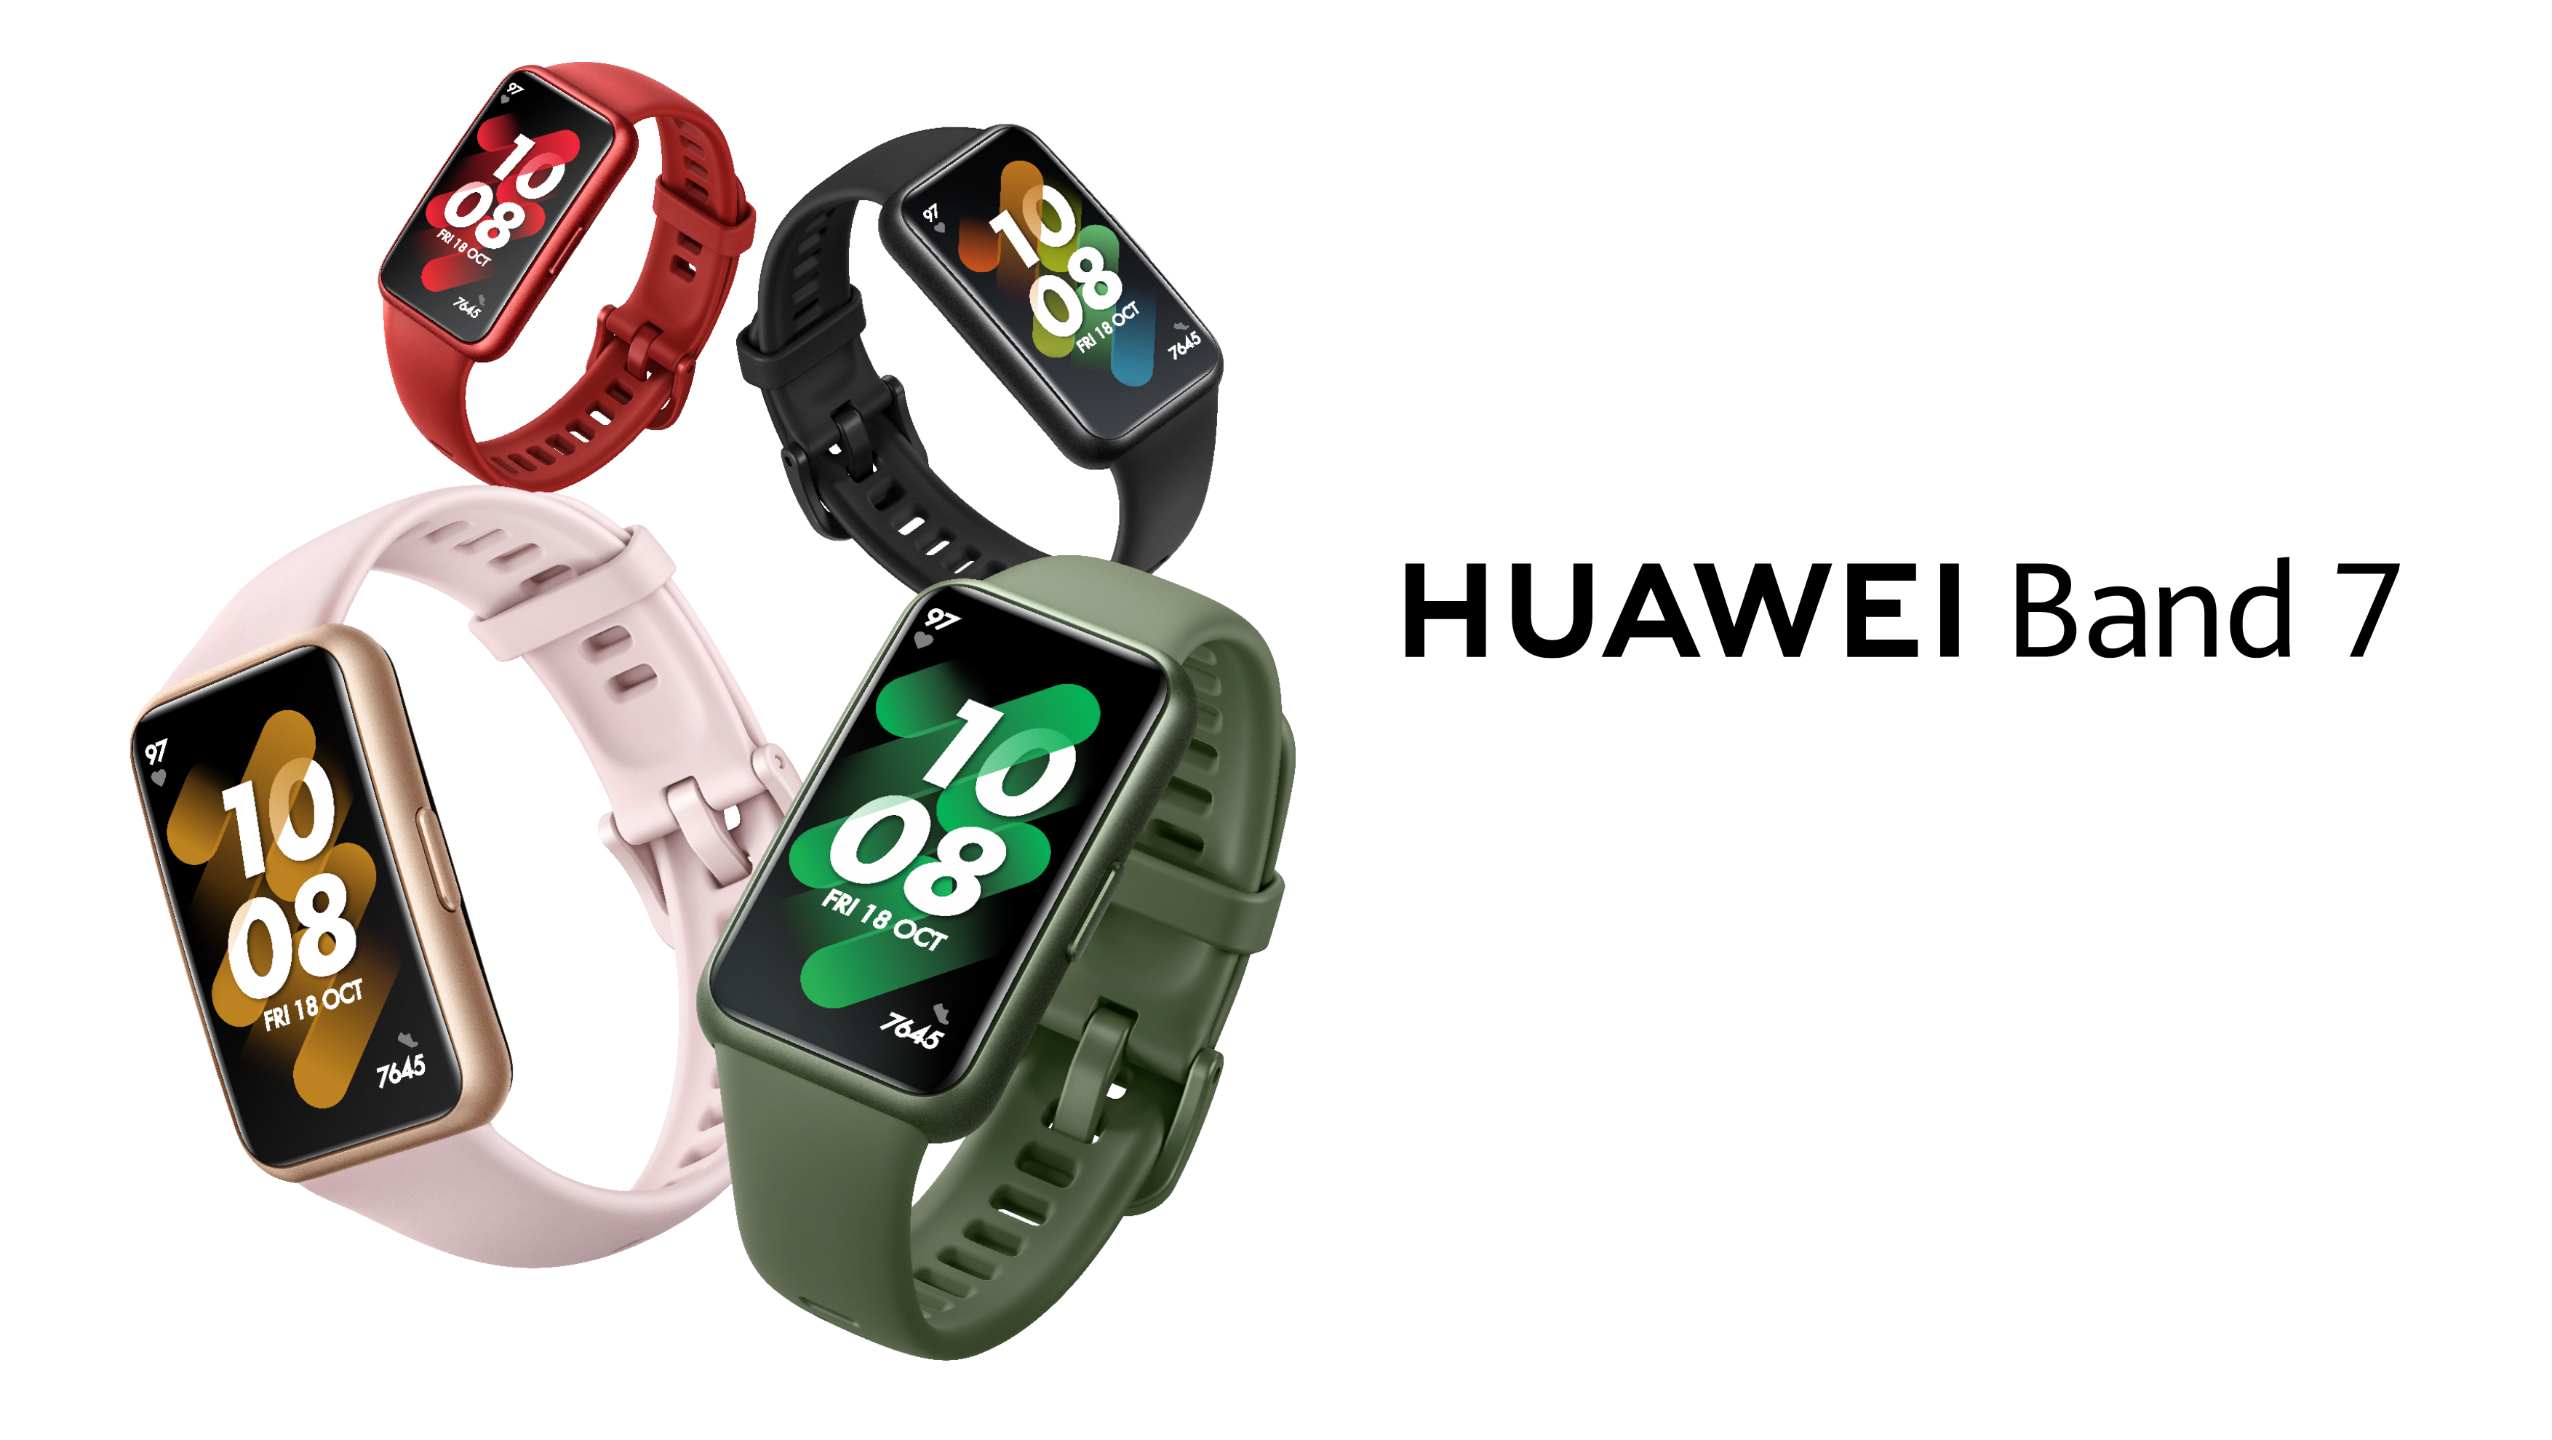 Huawei Band 7: Fitness tracker arrives in Europe for €59.99 with 14 days of  battery life, an AMOLED display and a SpO2 sensor - NotebookCheck.net News